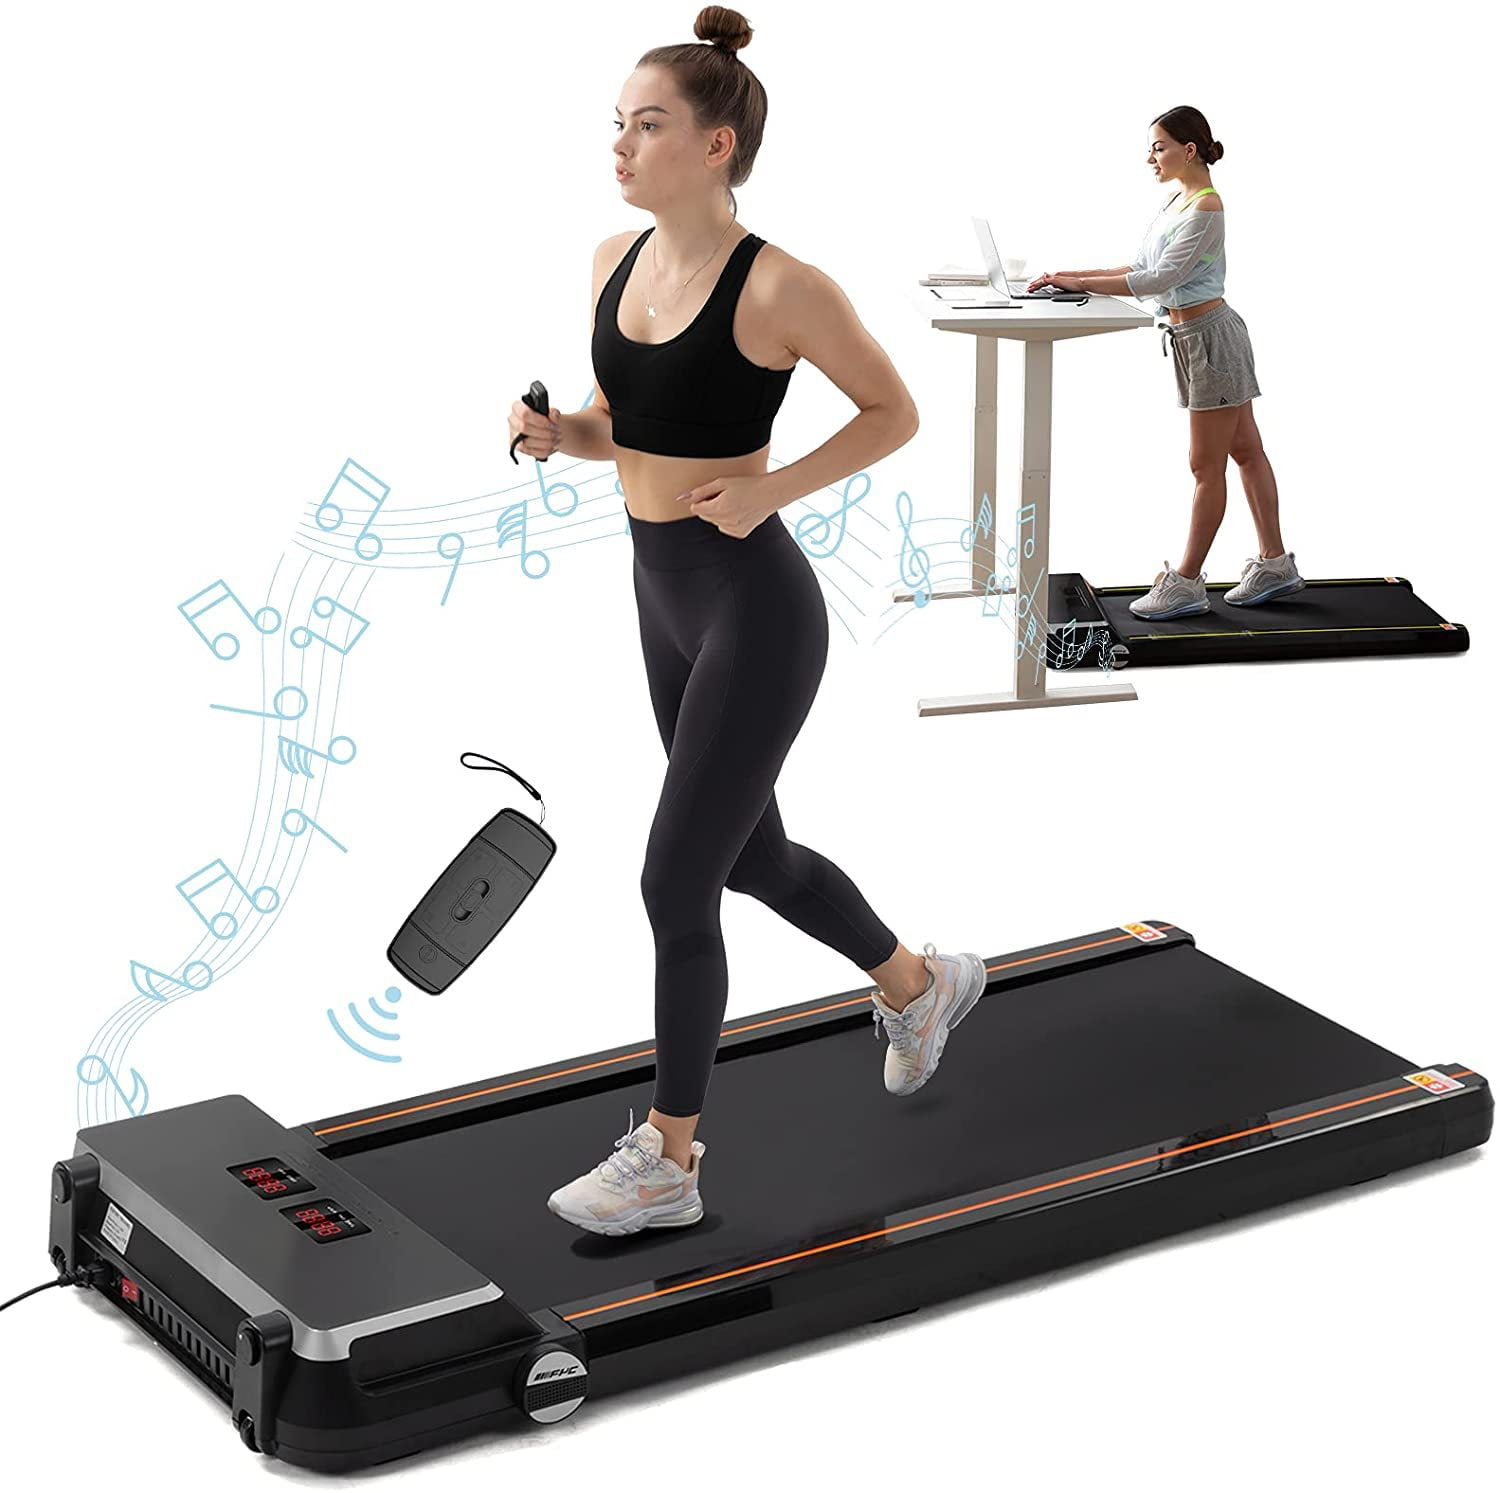 TANGNADE 4-in-1 Mechanical Treadmill Folding Shock Running T-wisting Draw Rope for Home Gym Workout Fitness Running Machine Supine 